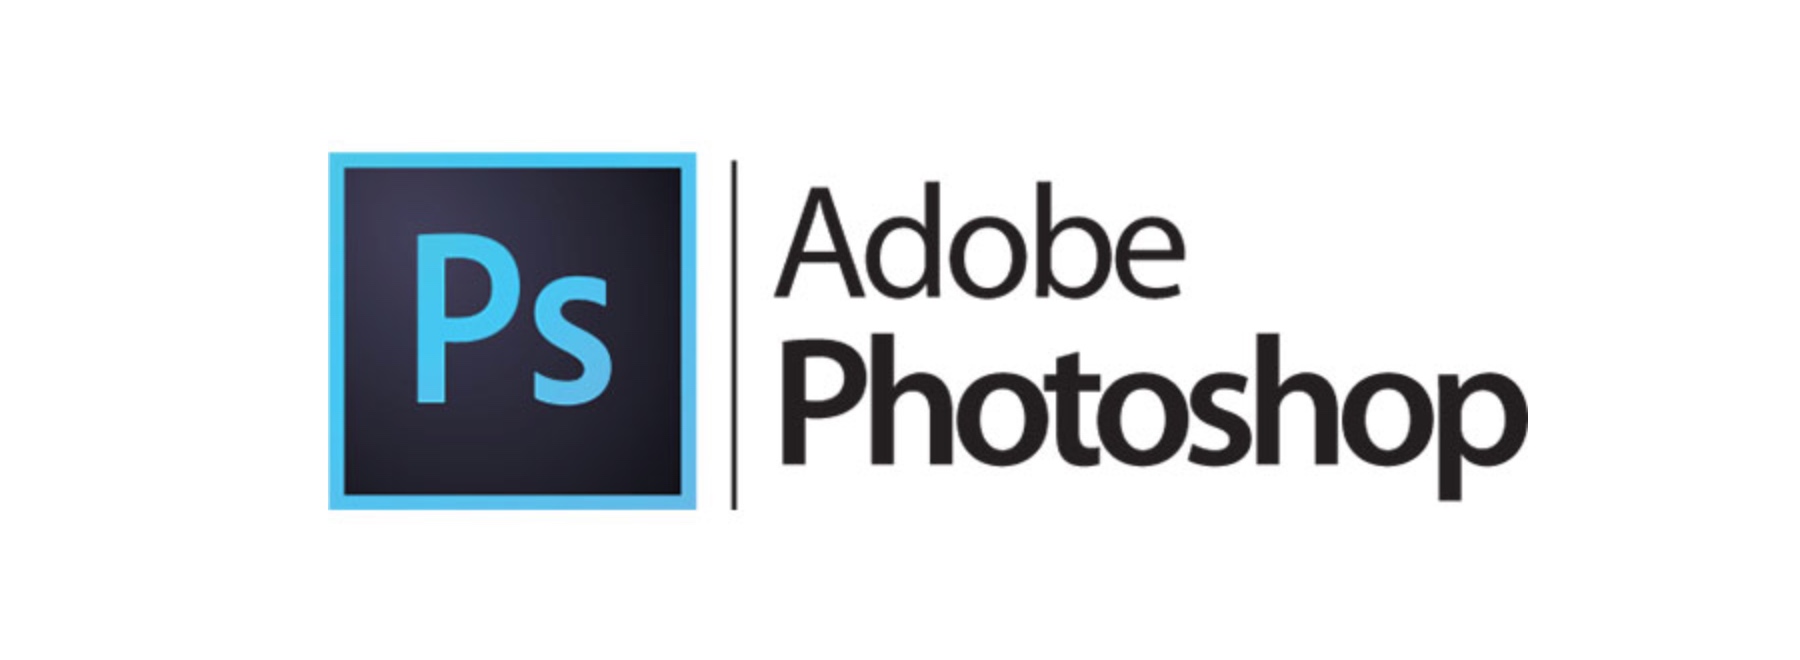 31 Years of Adobe Photoshop Design History - 101 Images - Version Museum